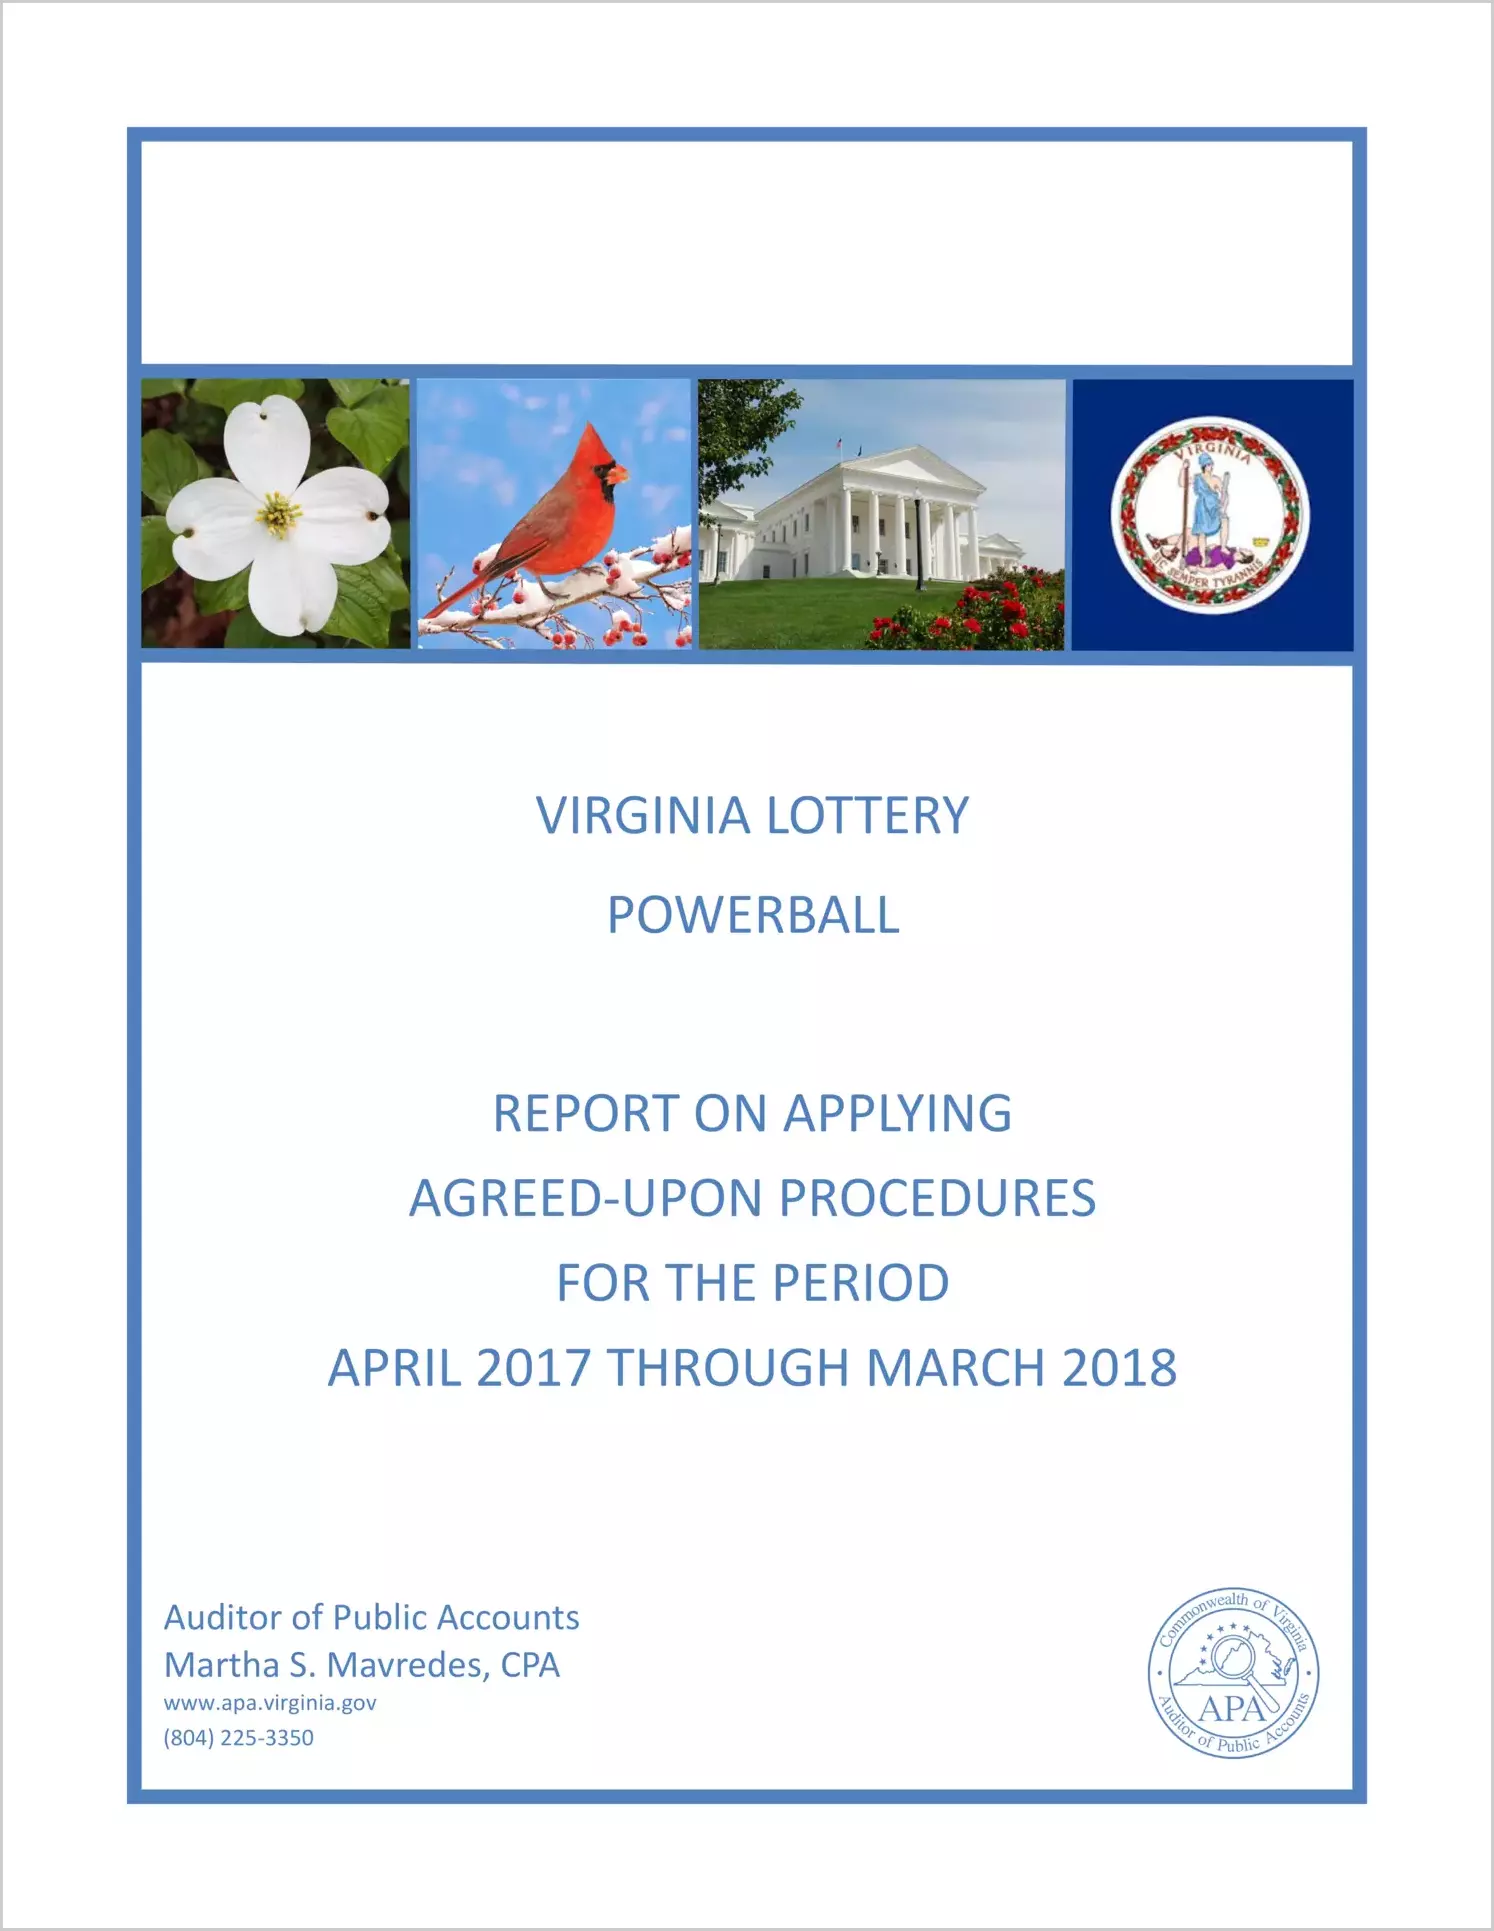 VA Lottery PowerBall report on Applying Agreed-Upon Procedures for the period April 2017 through March 2018